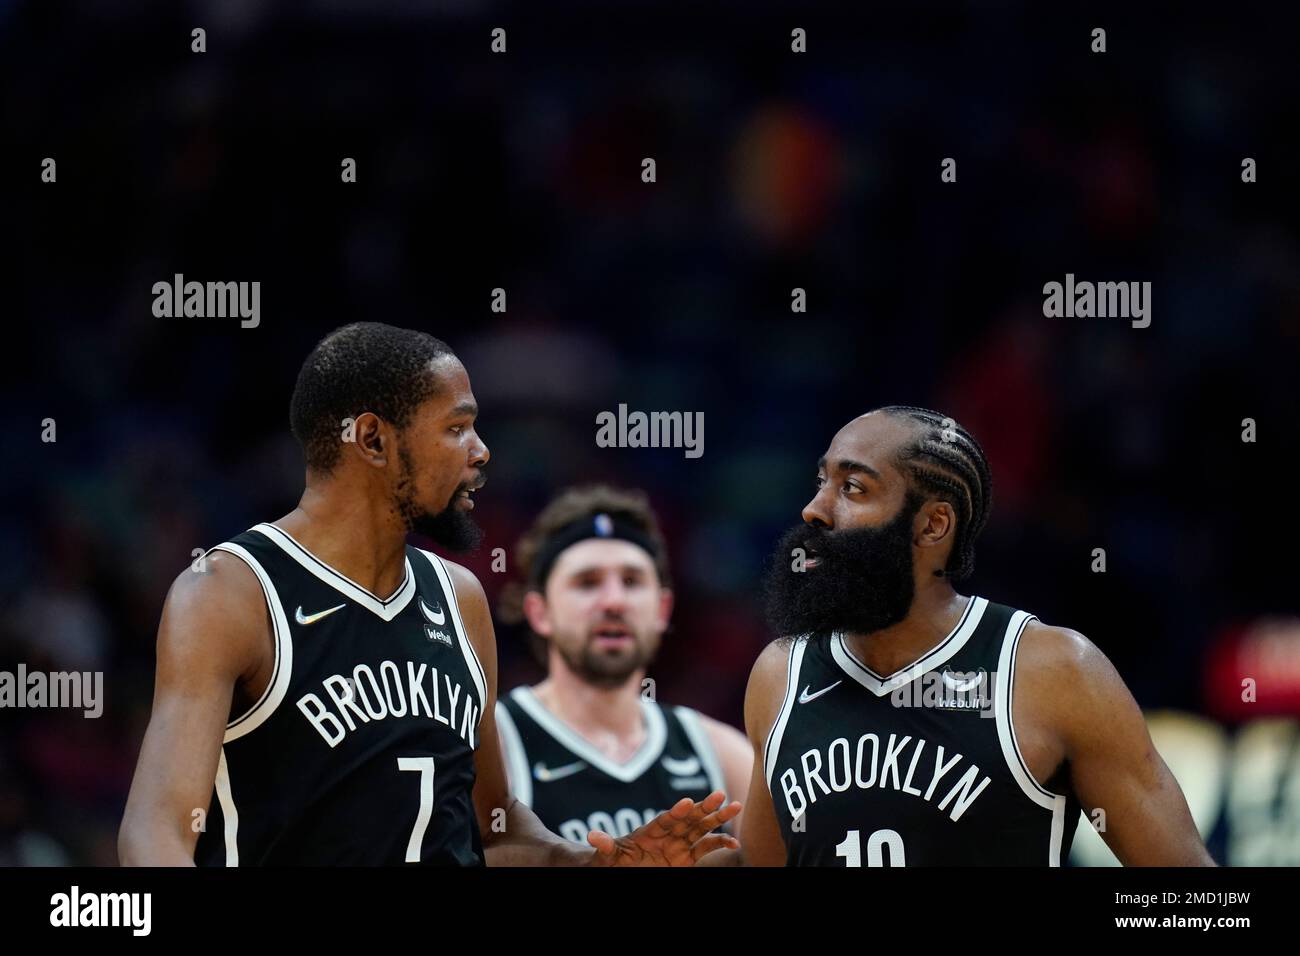 Brooklyn Nets guard James Harden (13) talks with forward Kevin Durant (7) in the second half of an NBA basketball game against the New Orleans Pelicans in New Orleans, Friday, Nov. 12, 2021. The Nets won 120-112. (AP Photo/Gerald Herbert) Stockfoto